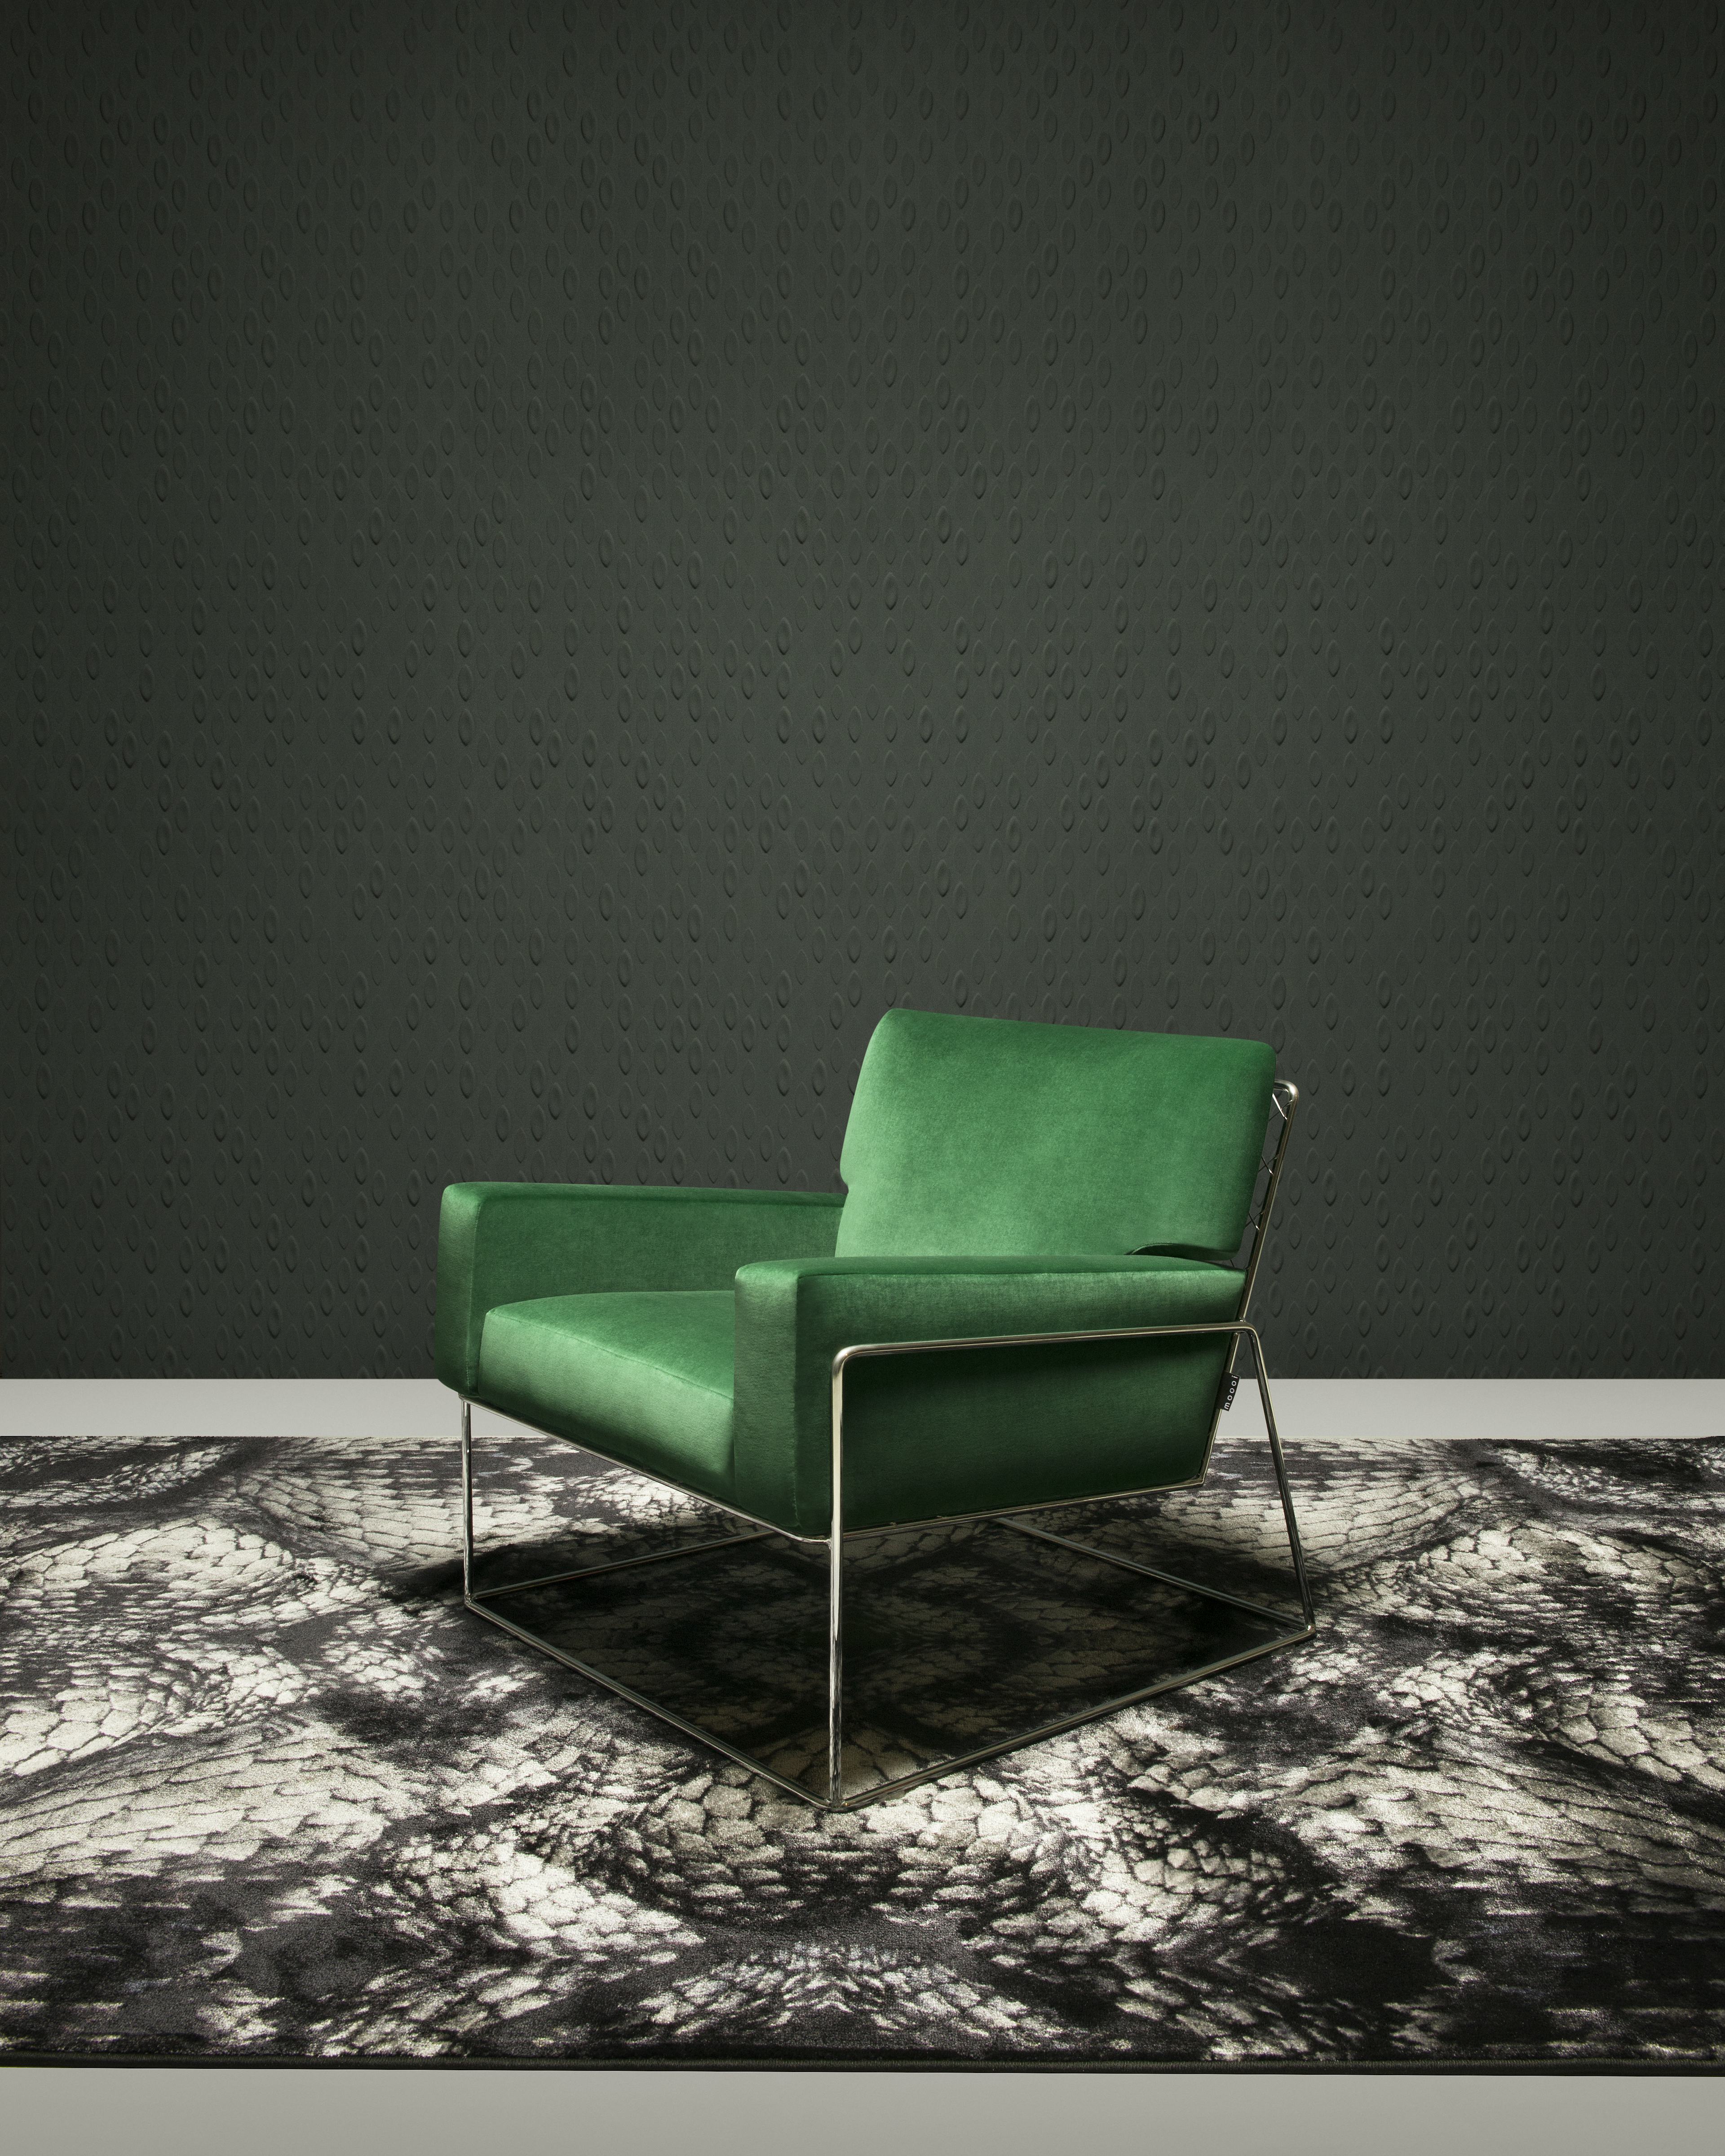 Poetic composition Charles Armchair green, Moooi Carpet and Moooi Wallcovering dark